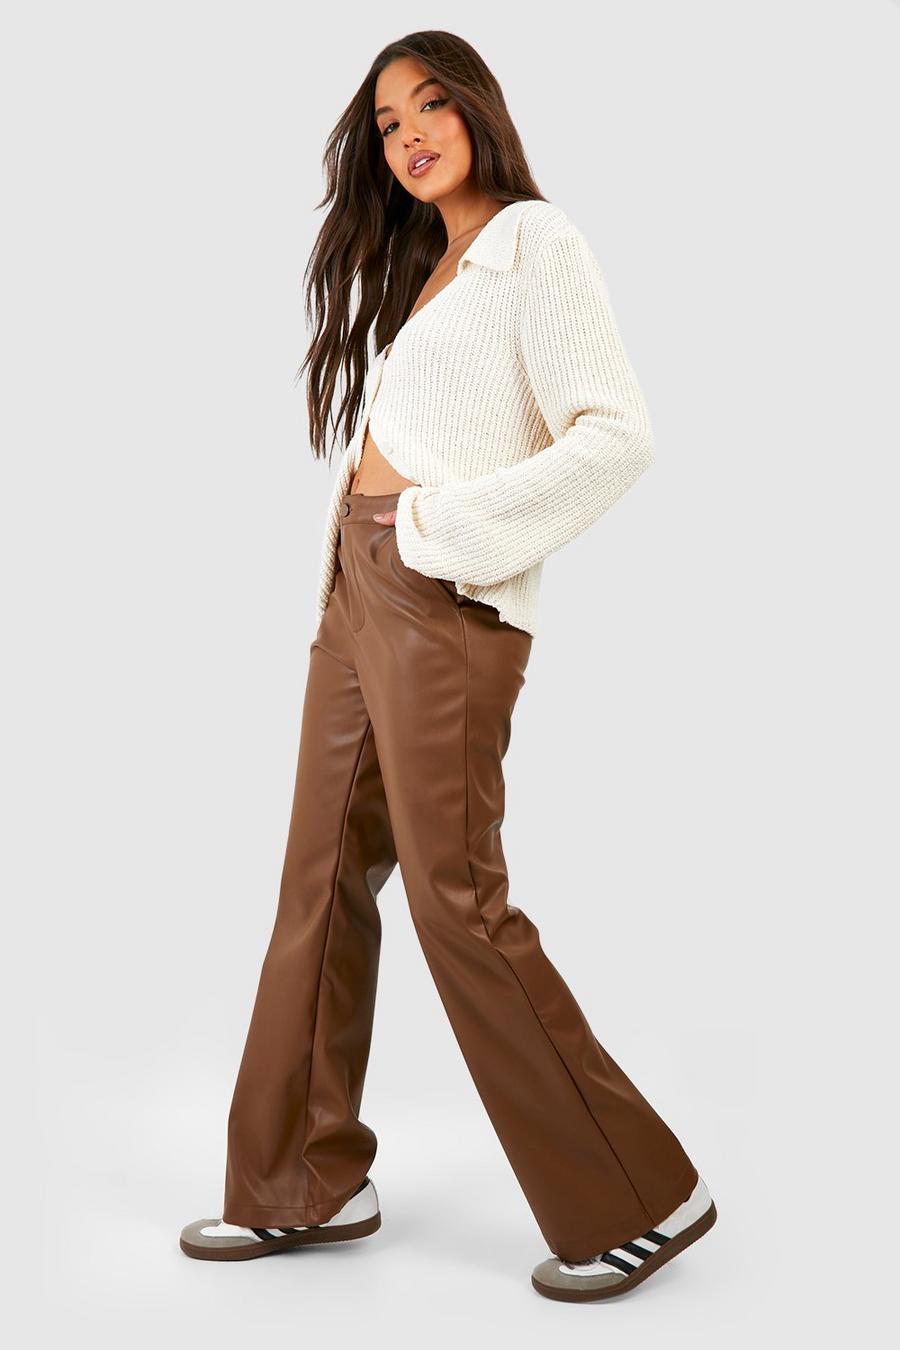 Chocolate Leather Look High Waisted Flared Pants